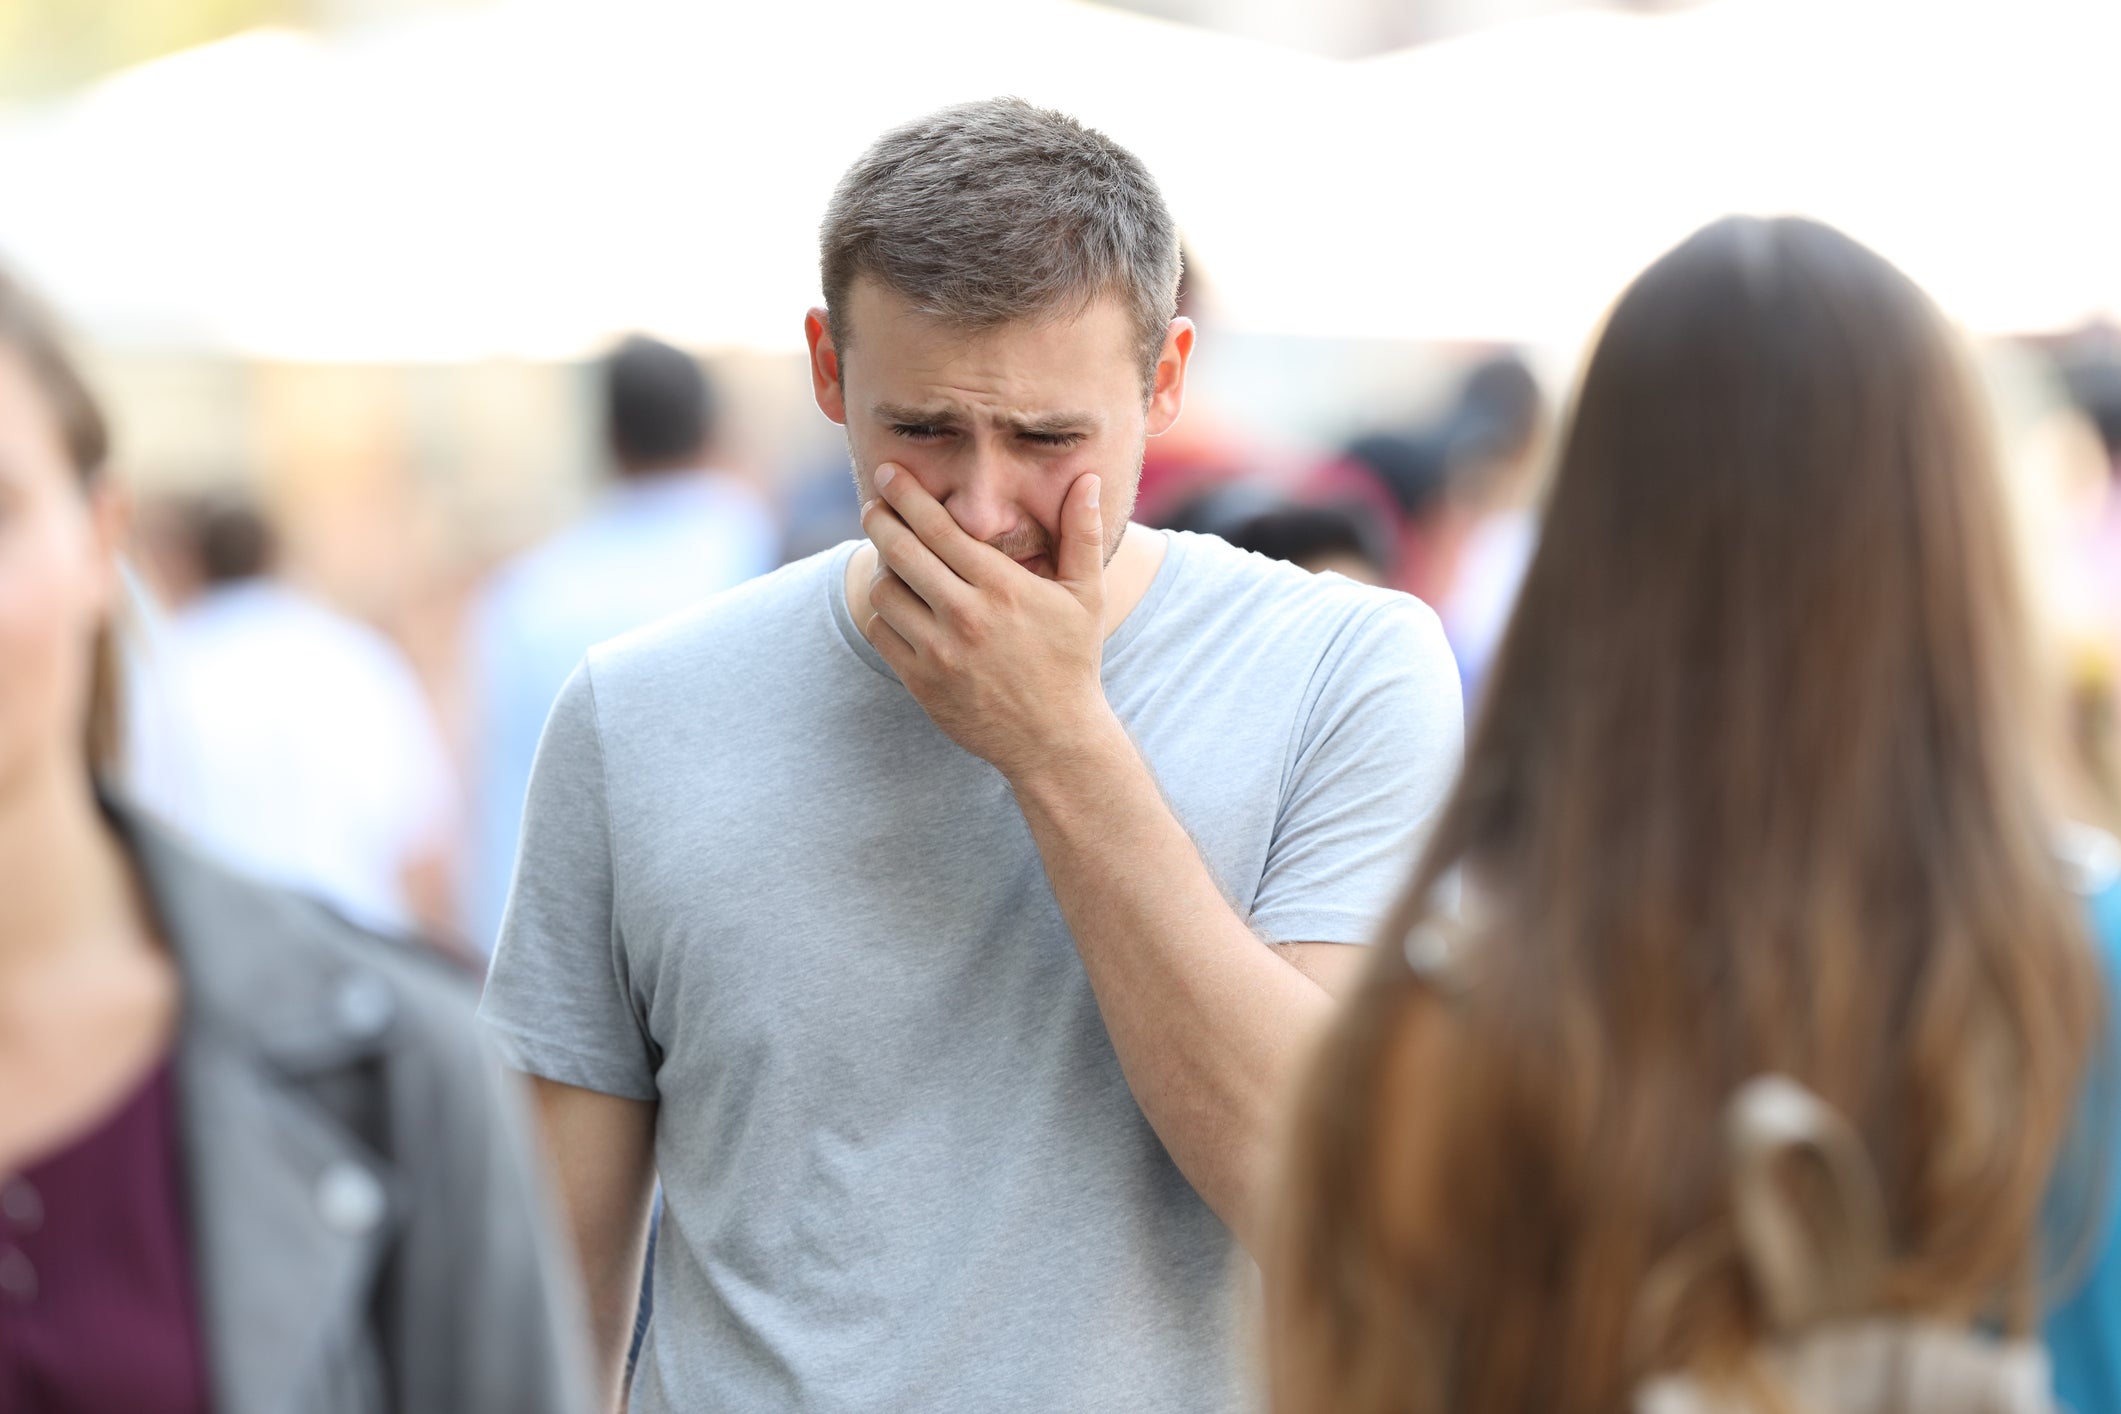 A man crying in the middle of a crowded sidewalk.